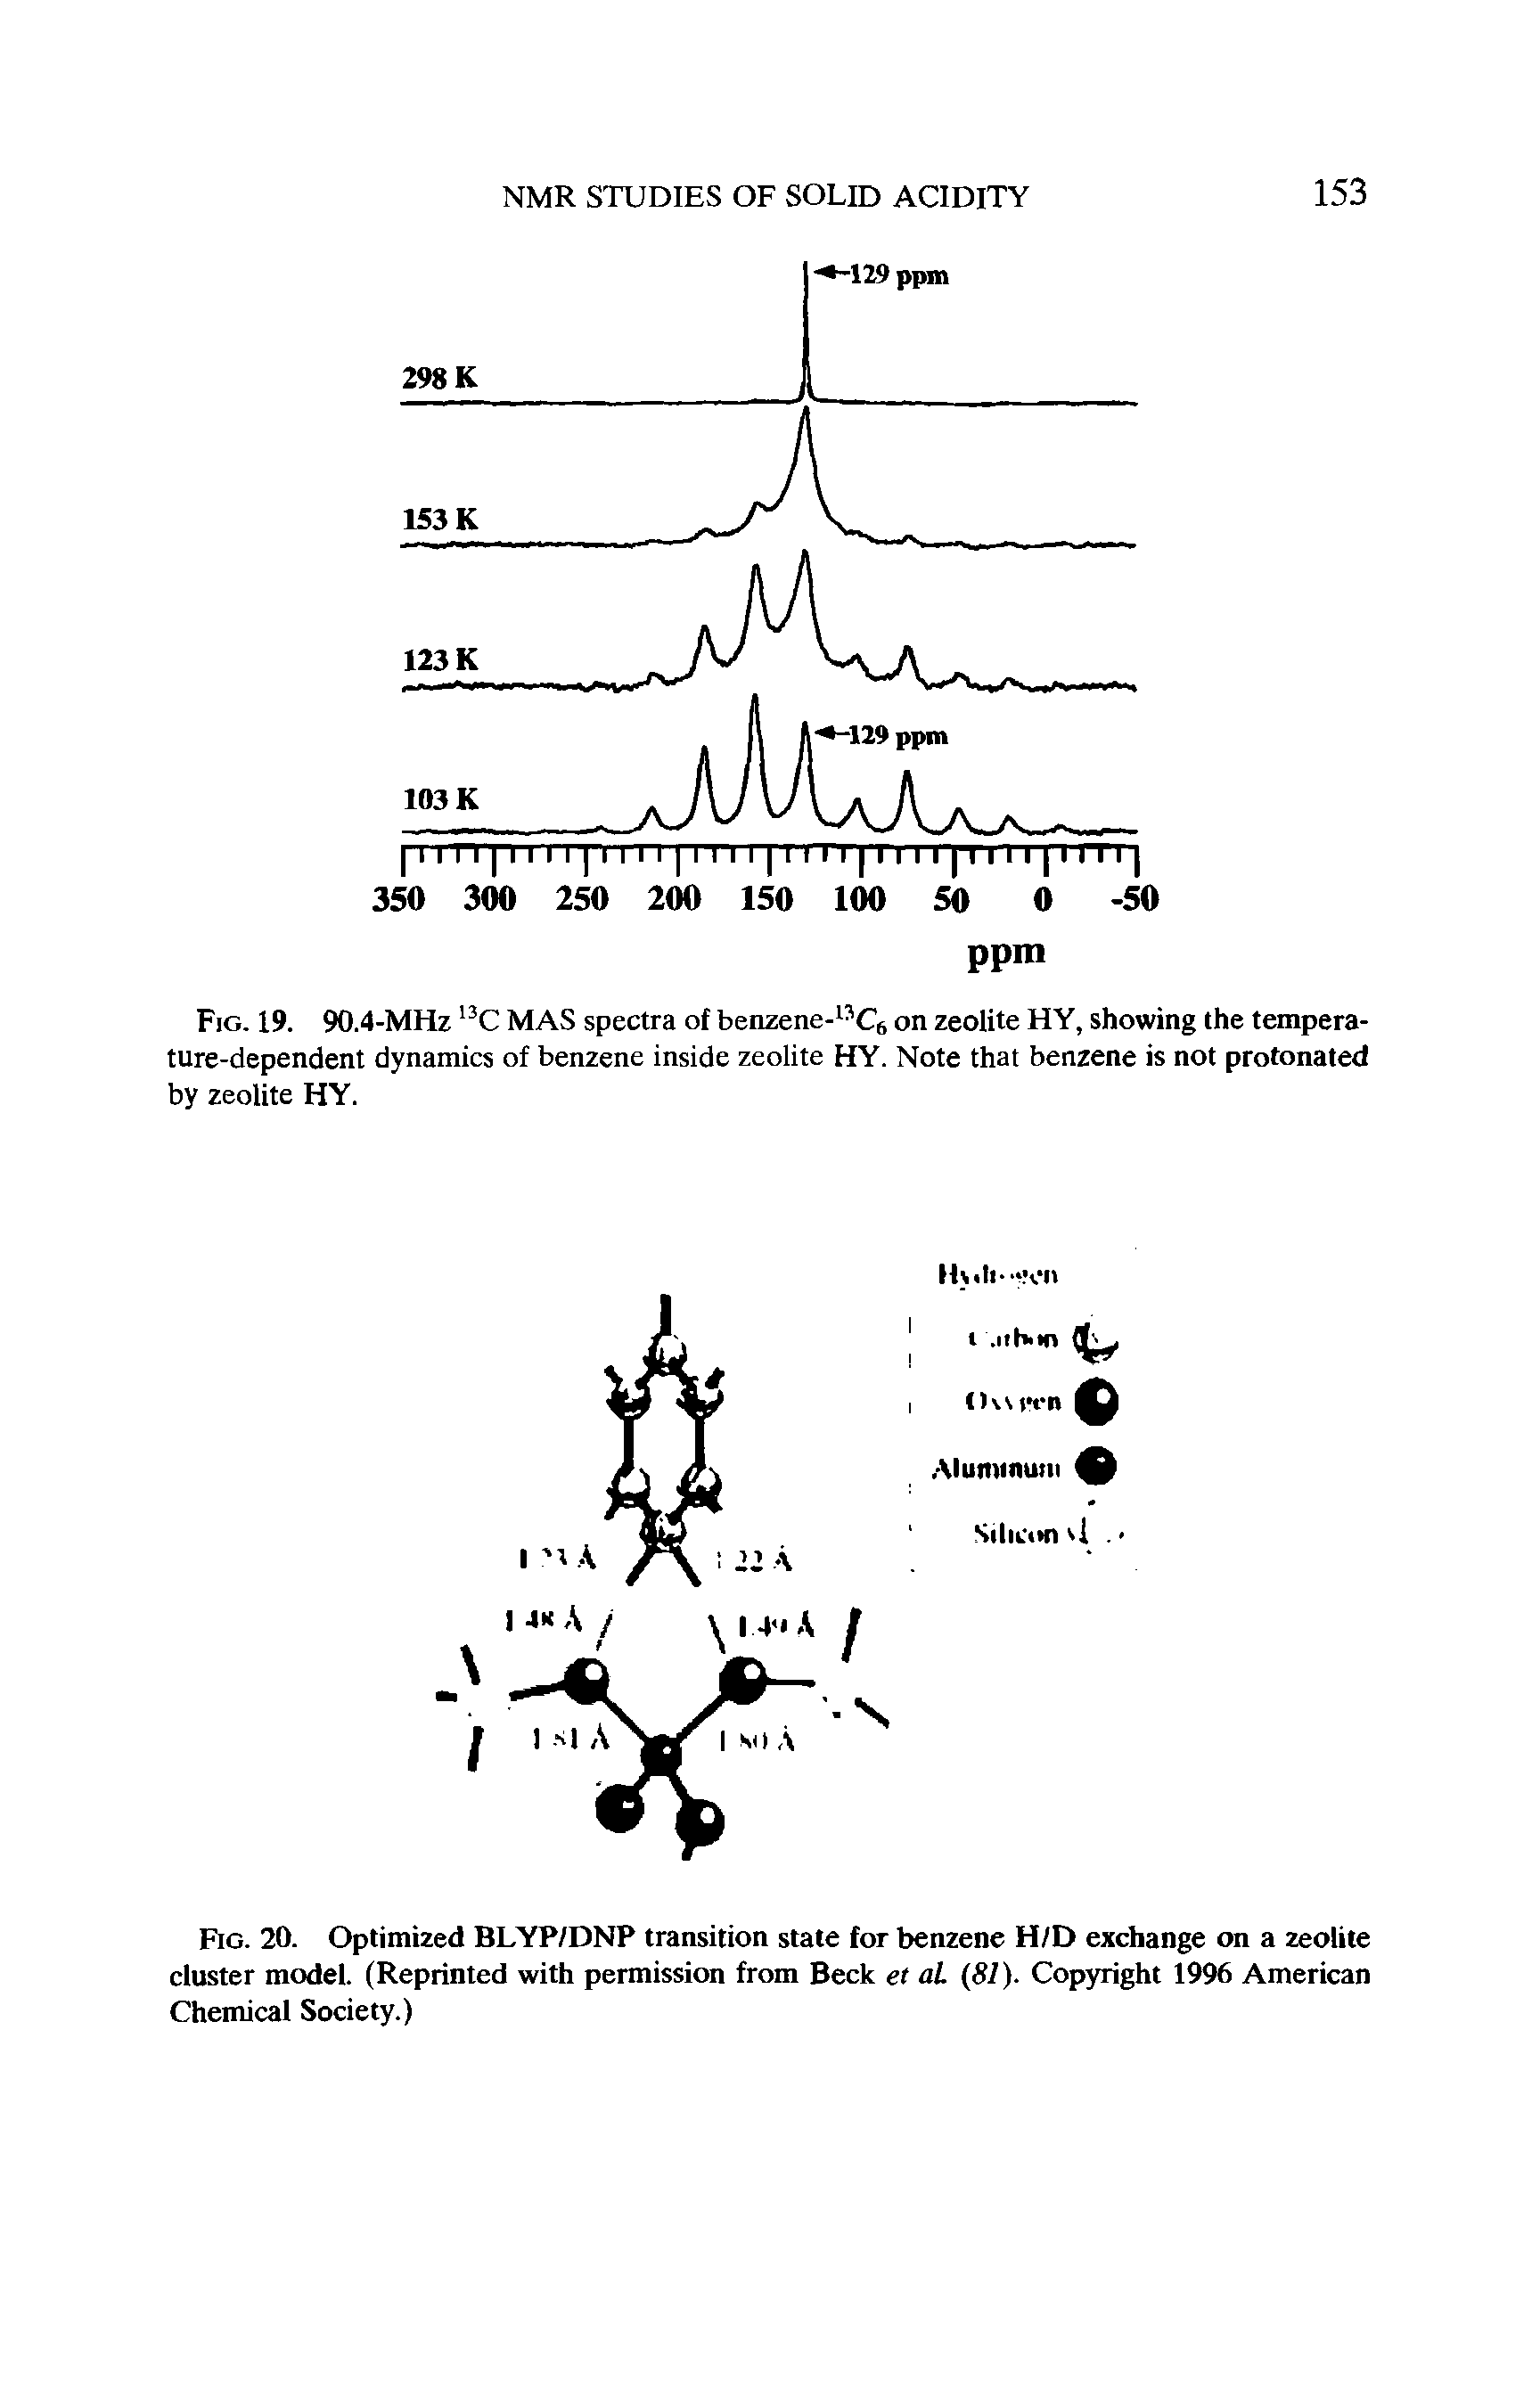 Fig. 20. Optimized BLYP/DNP transition state for benzene H/D exchange on a zeolite cluster model. (Reprinted with permission from Beck et al (81). Copyright 1996 American Chemical Society.)...